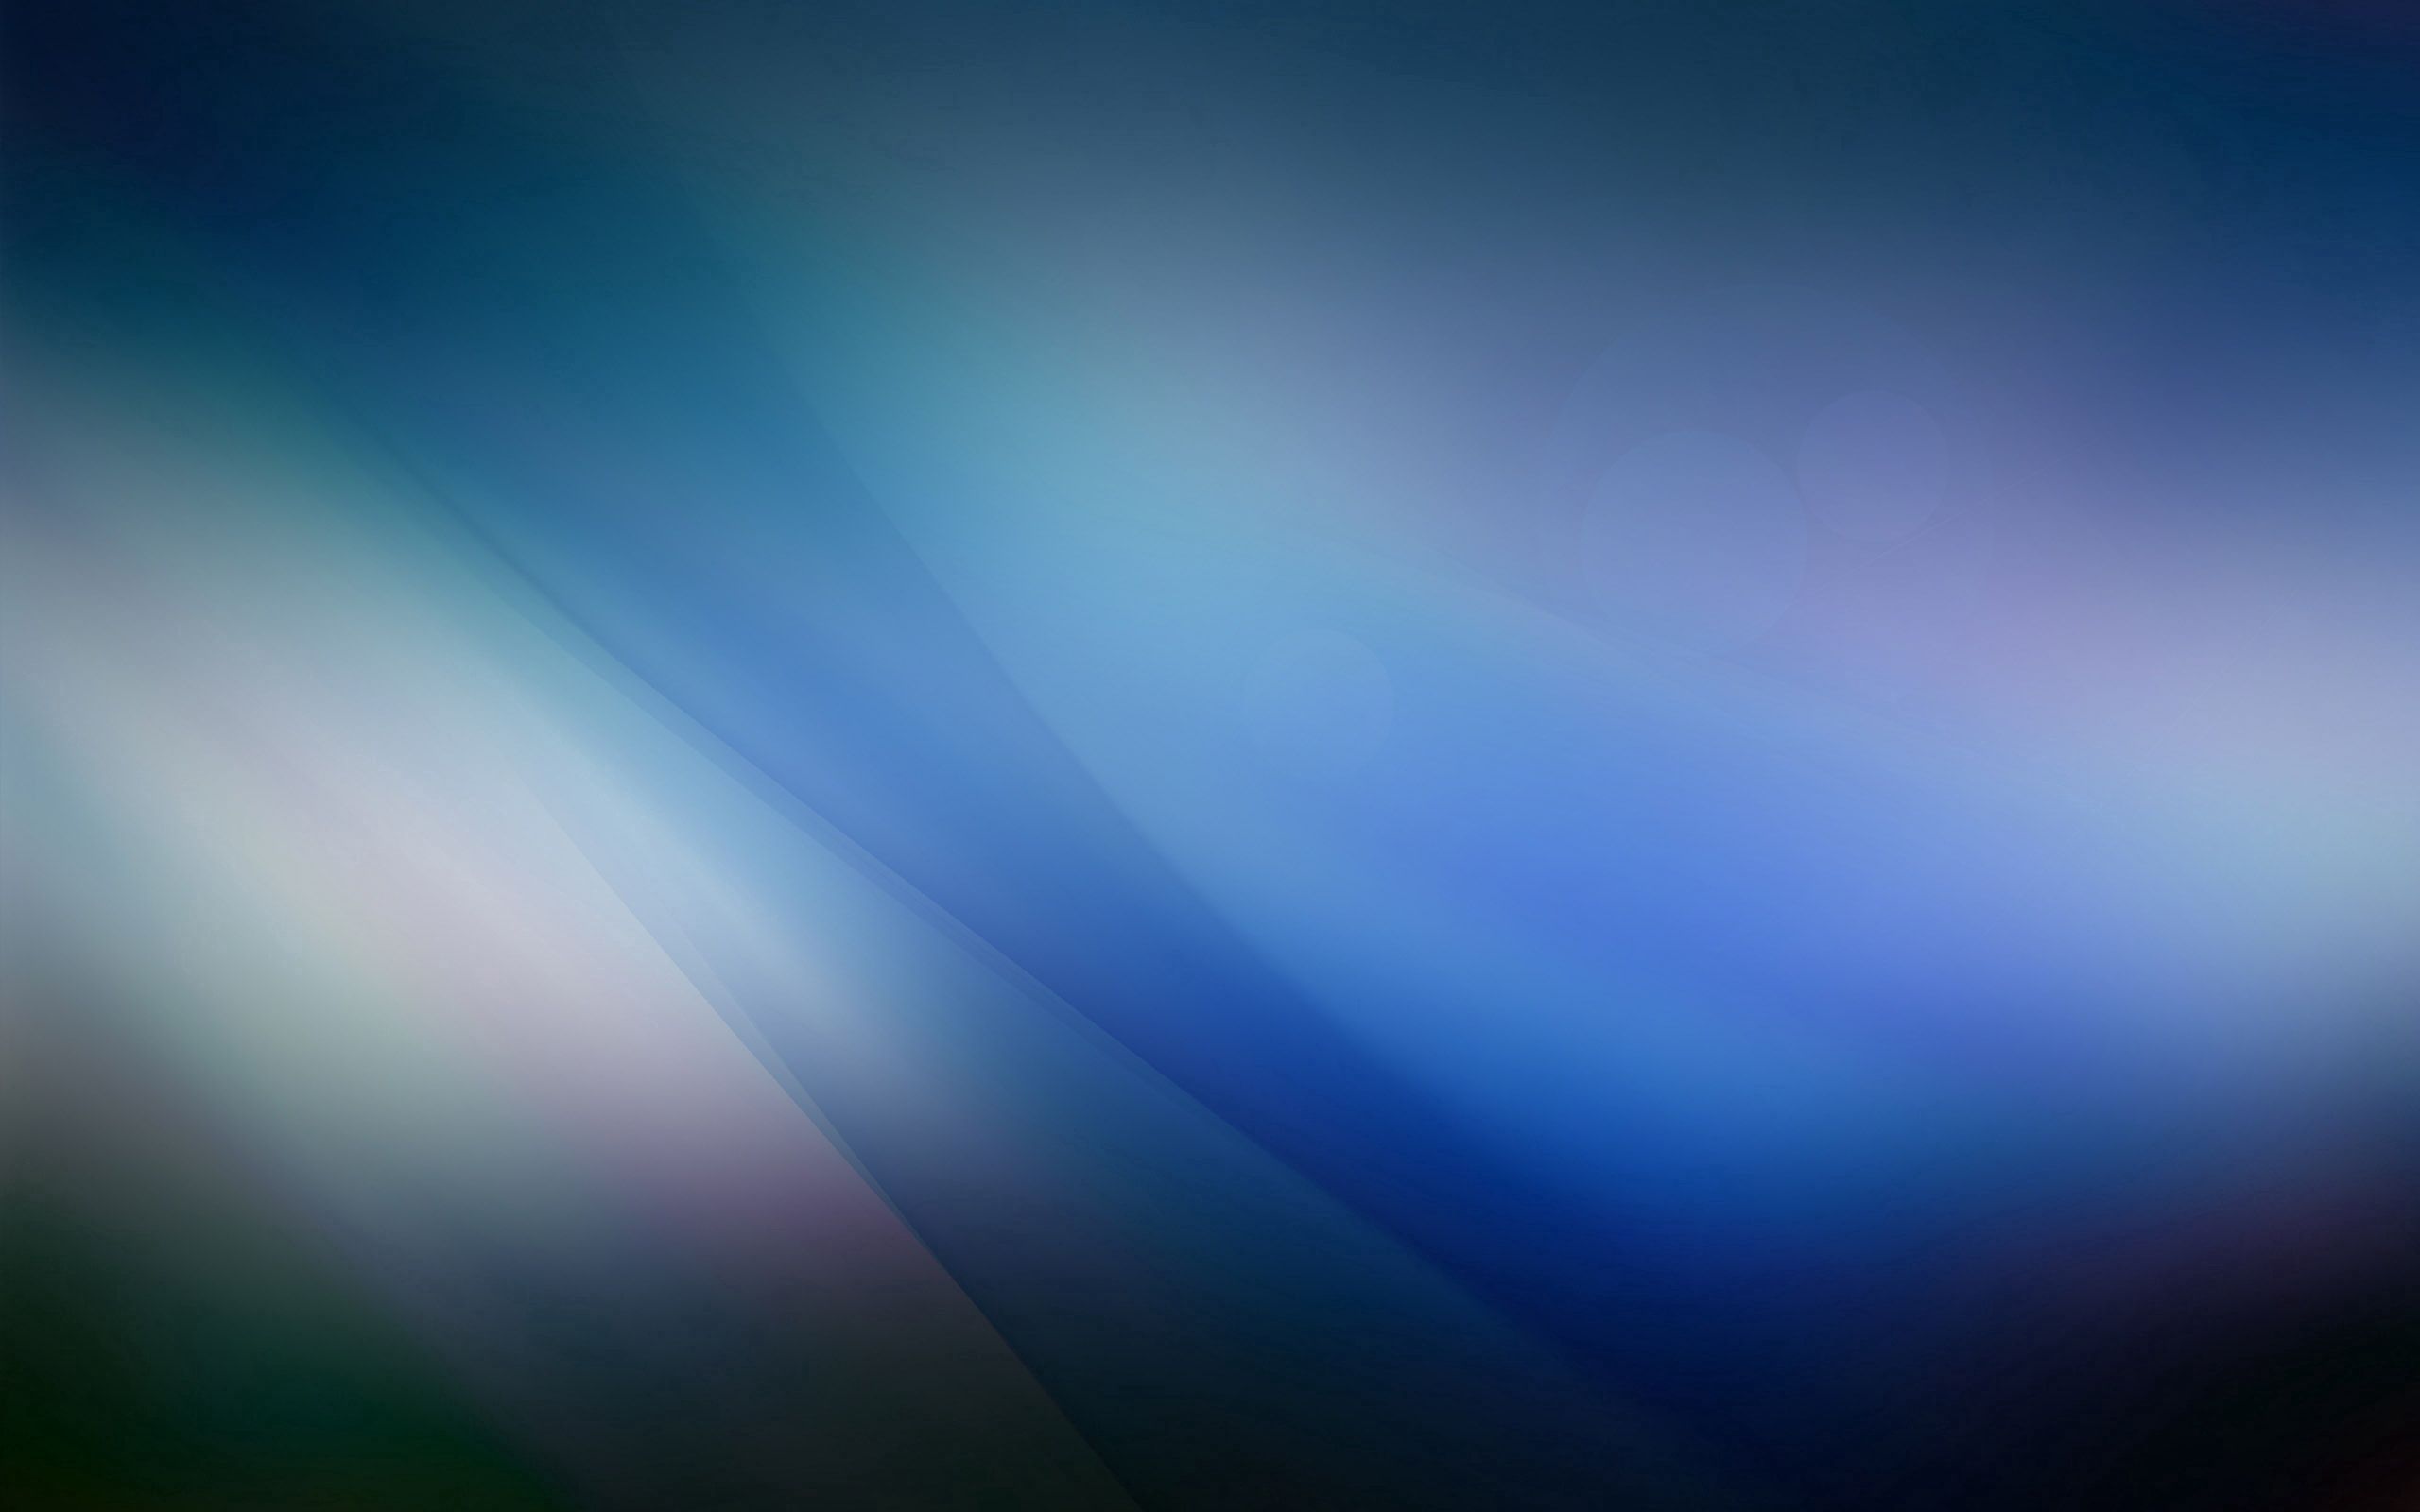 glare, abstract, shine, light, shadow, blurred, greased Image for desktop